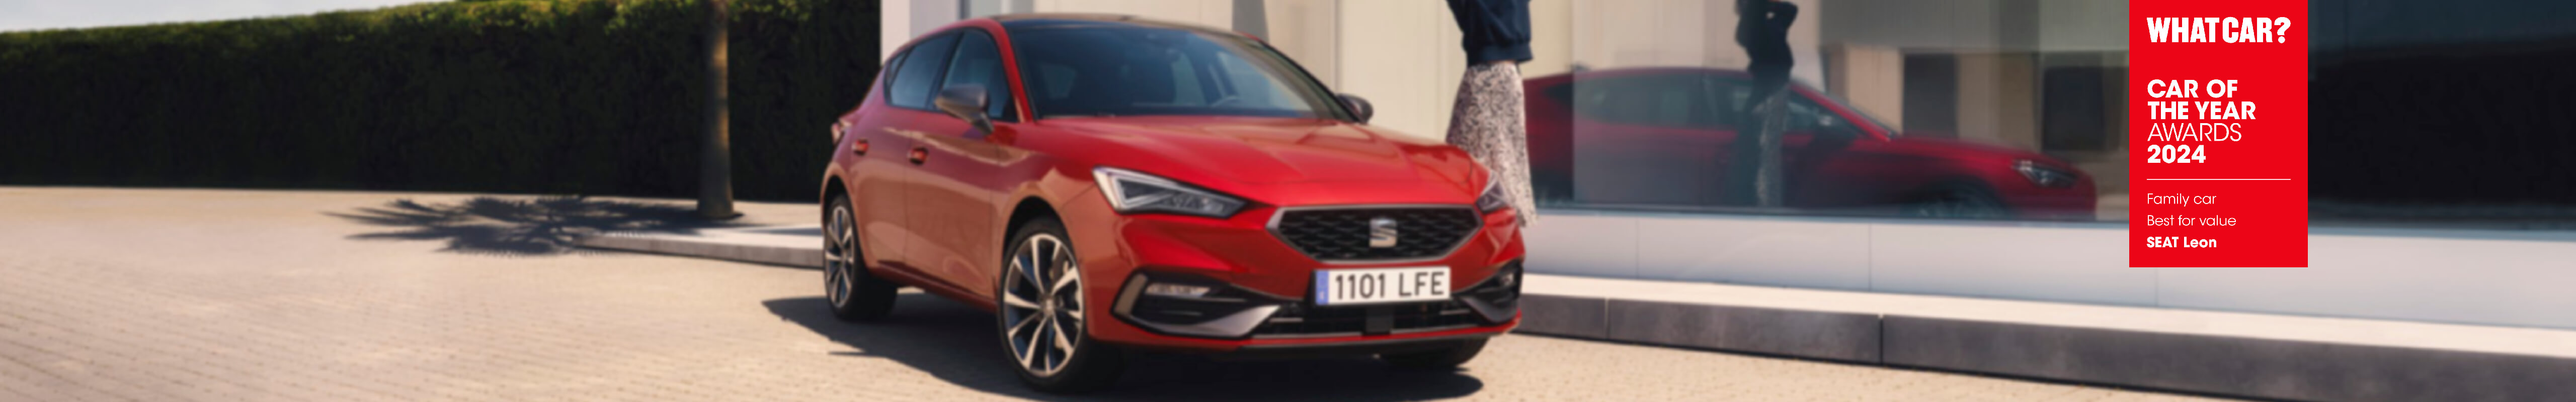 SEAT Leon wins Best Family Car for Value at What Car? Car of the Year Awards 2024